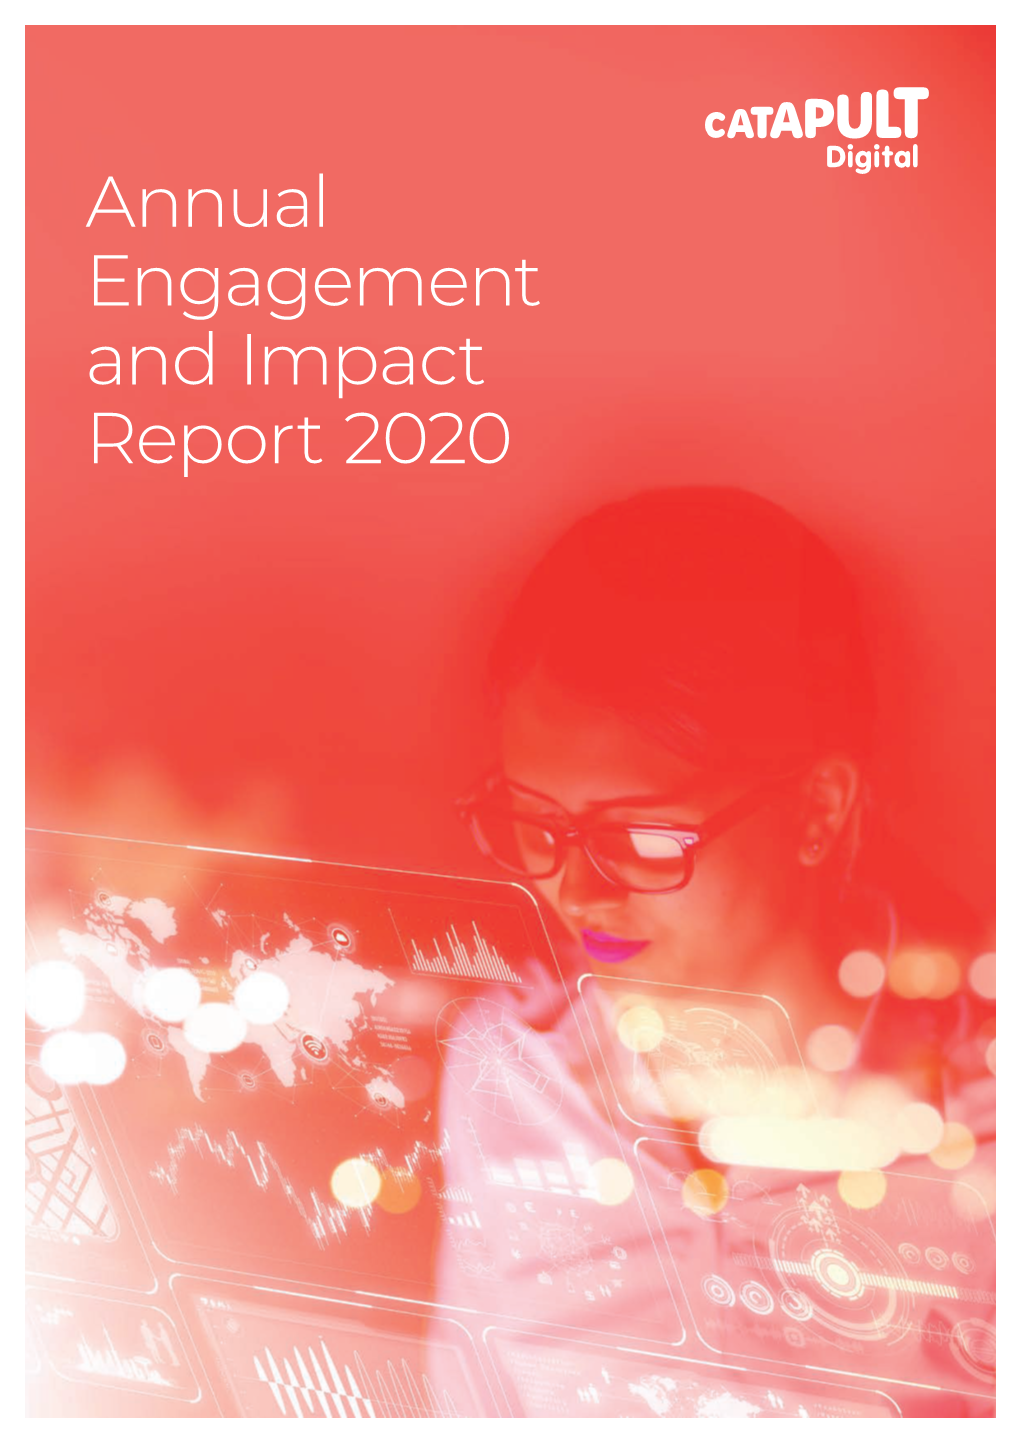 Annual Engagement and Impact Report 2020